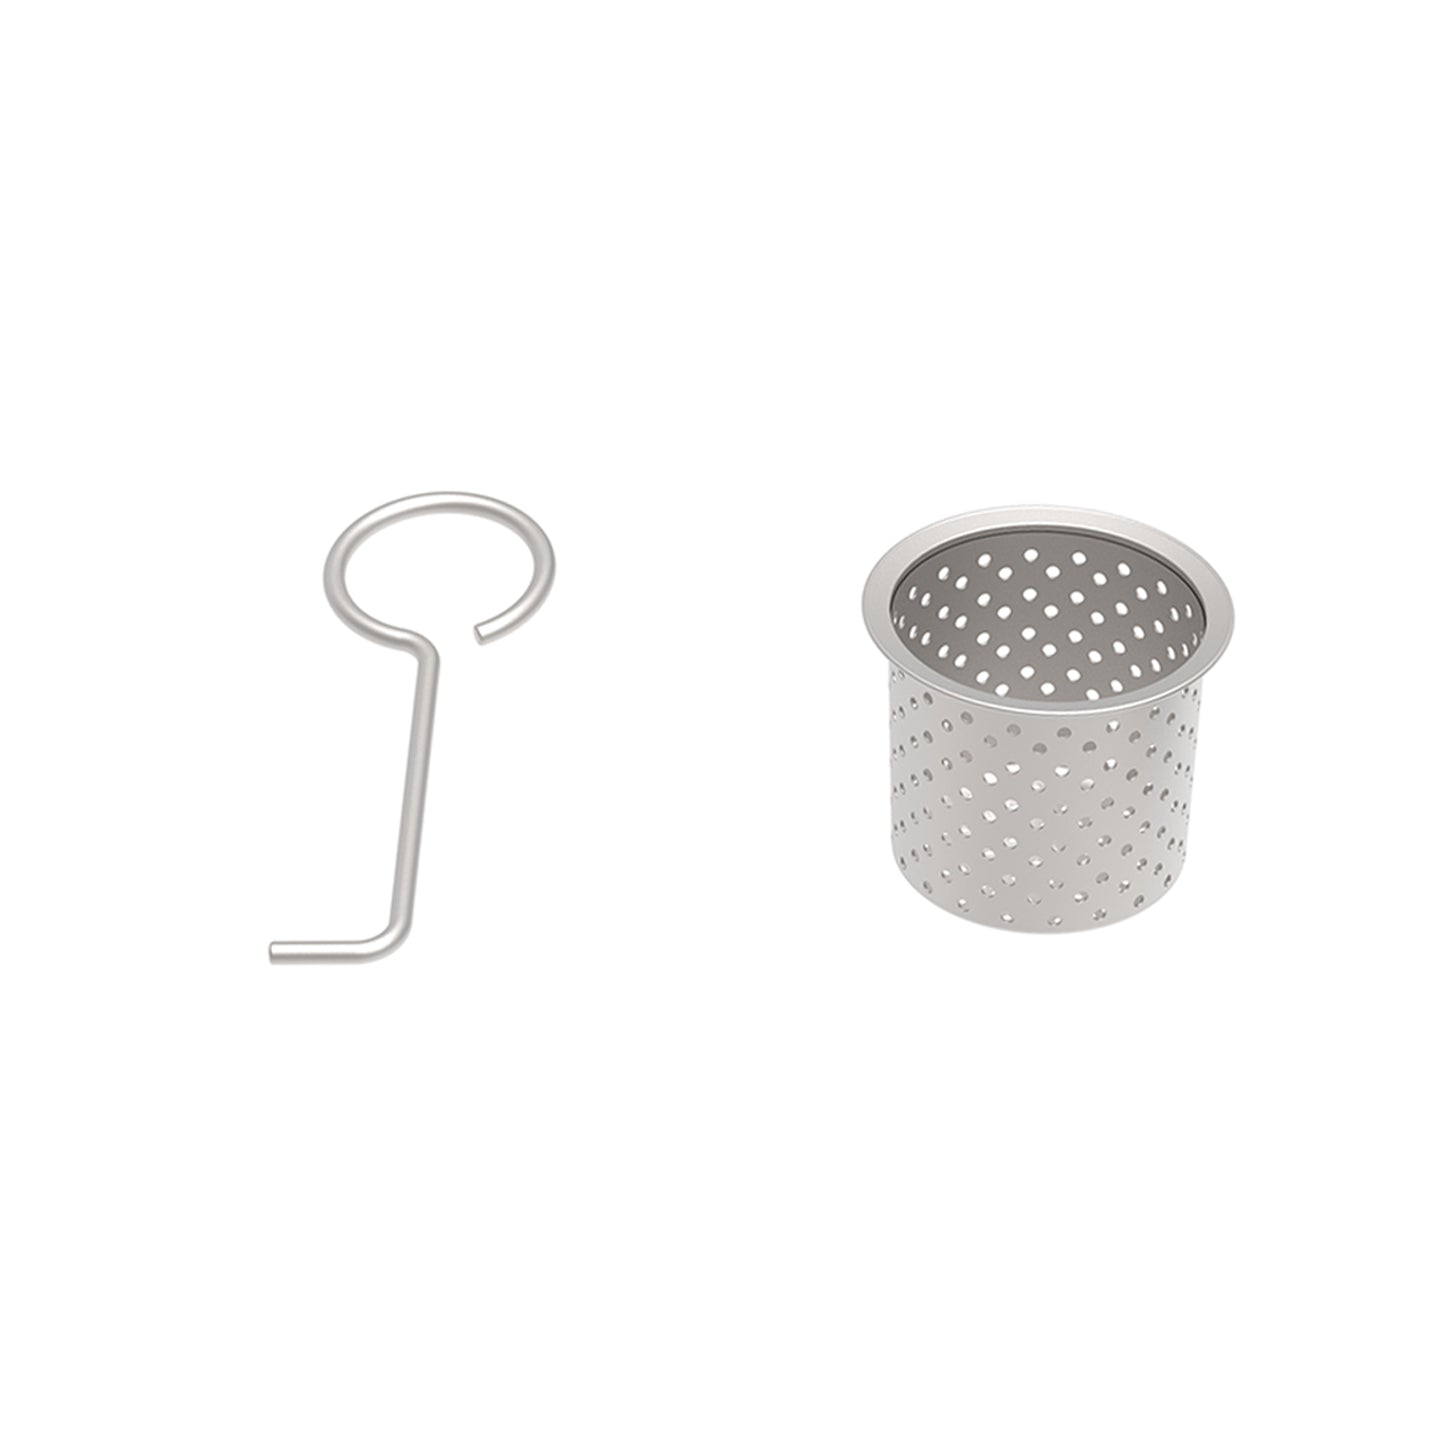 Shower Drain Hair Strainer With A Lifting Hook